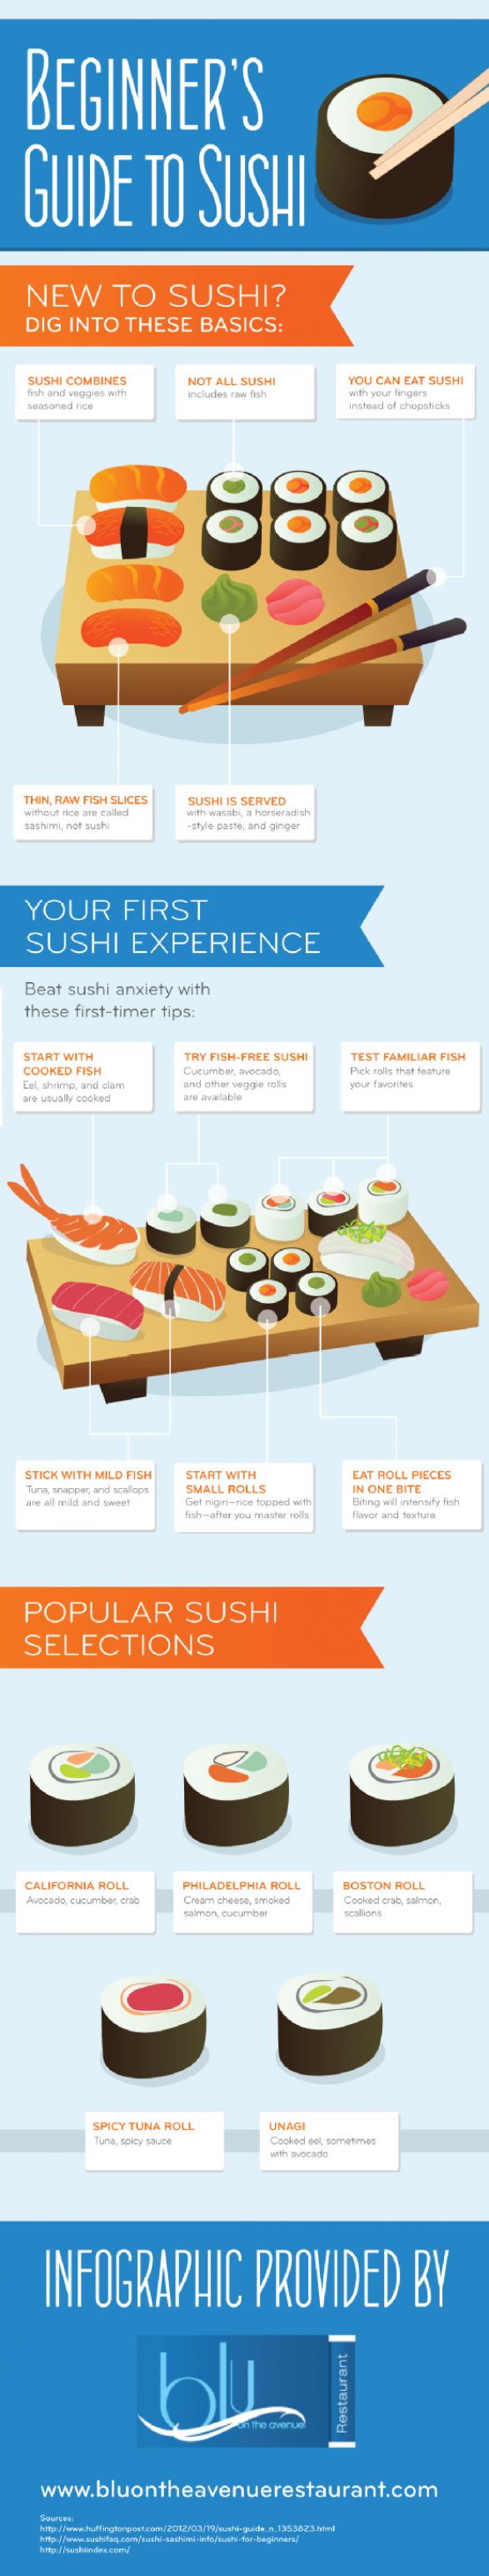 A Beginner's Guide To Sushi